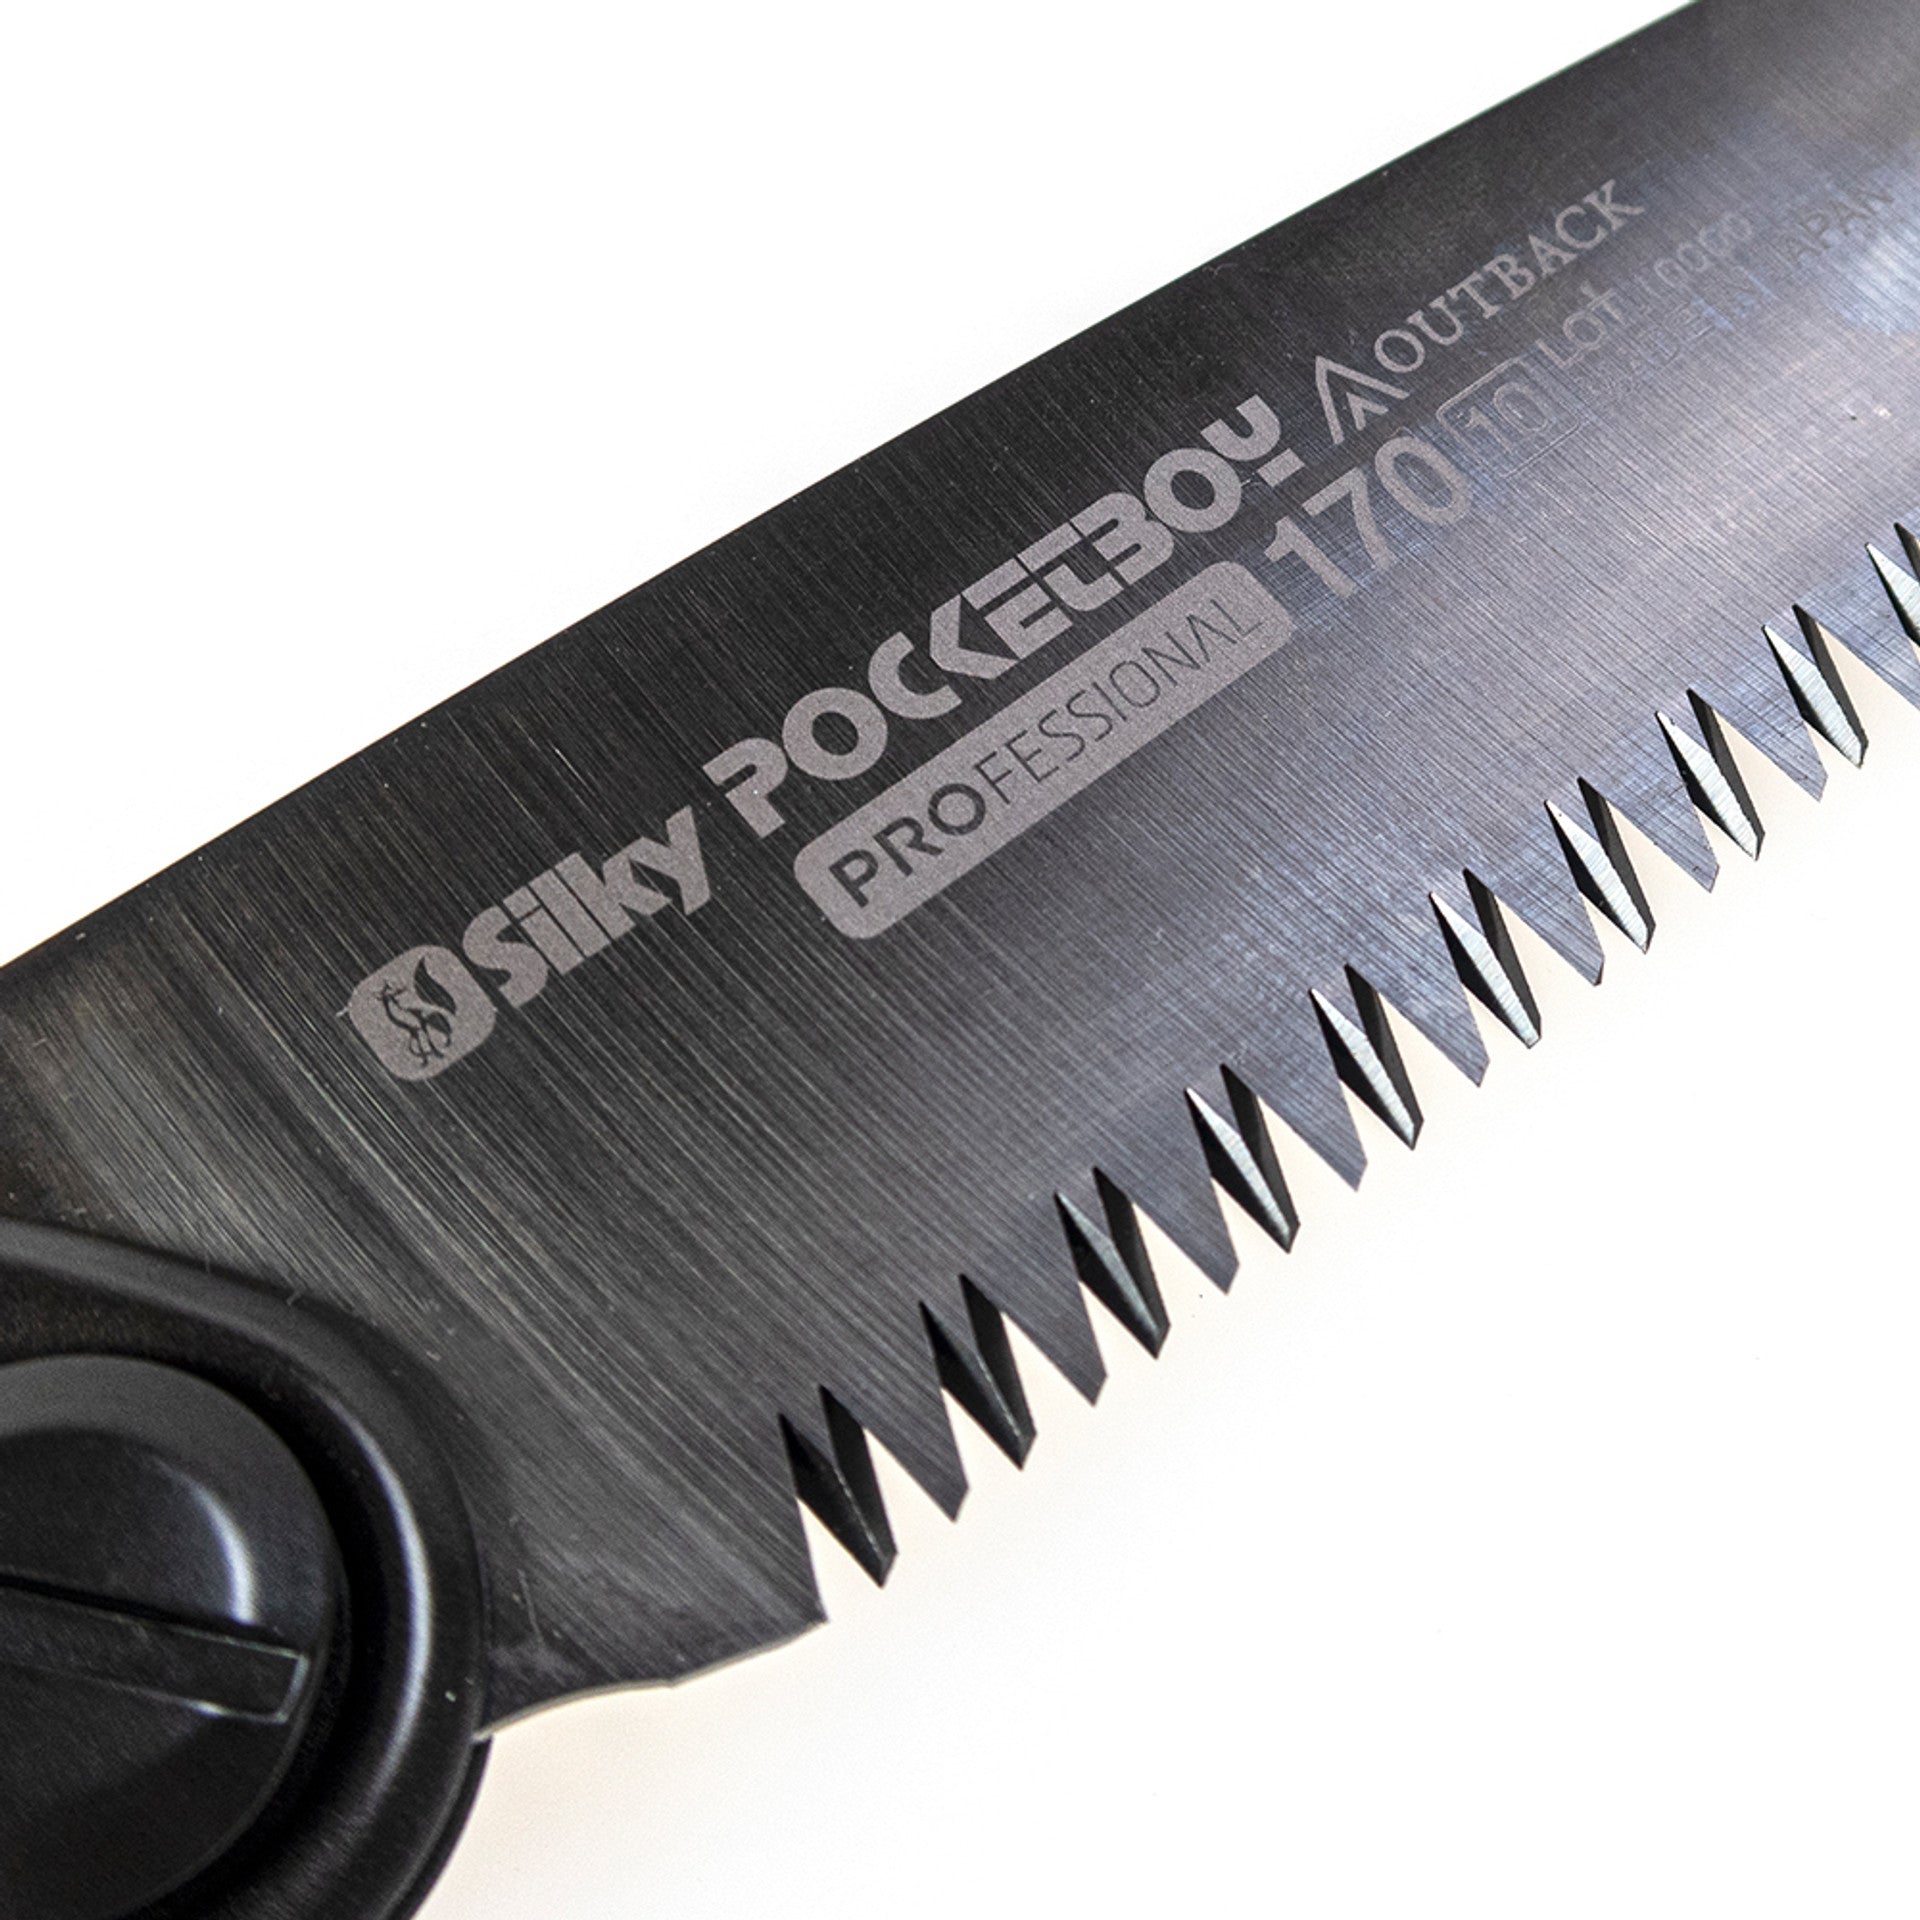 Silky PocketBoy 170mm Replacement Blade - Outback Edition